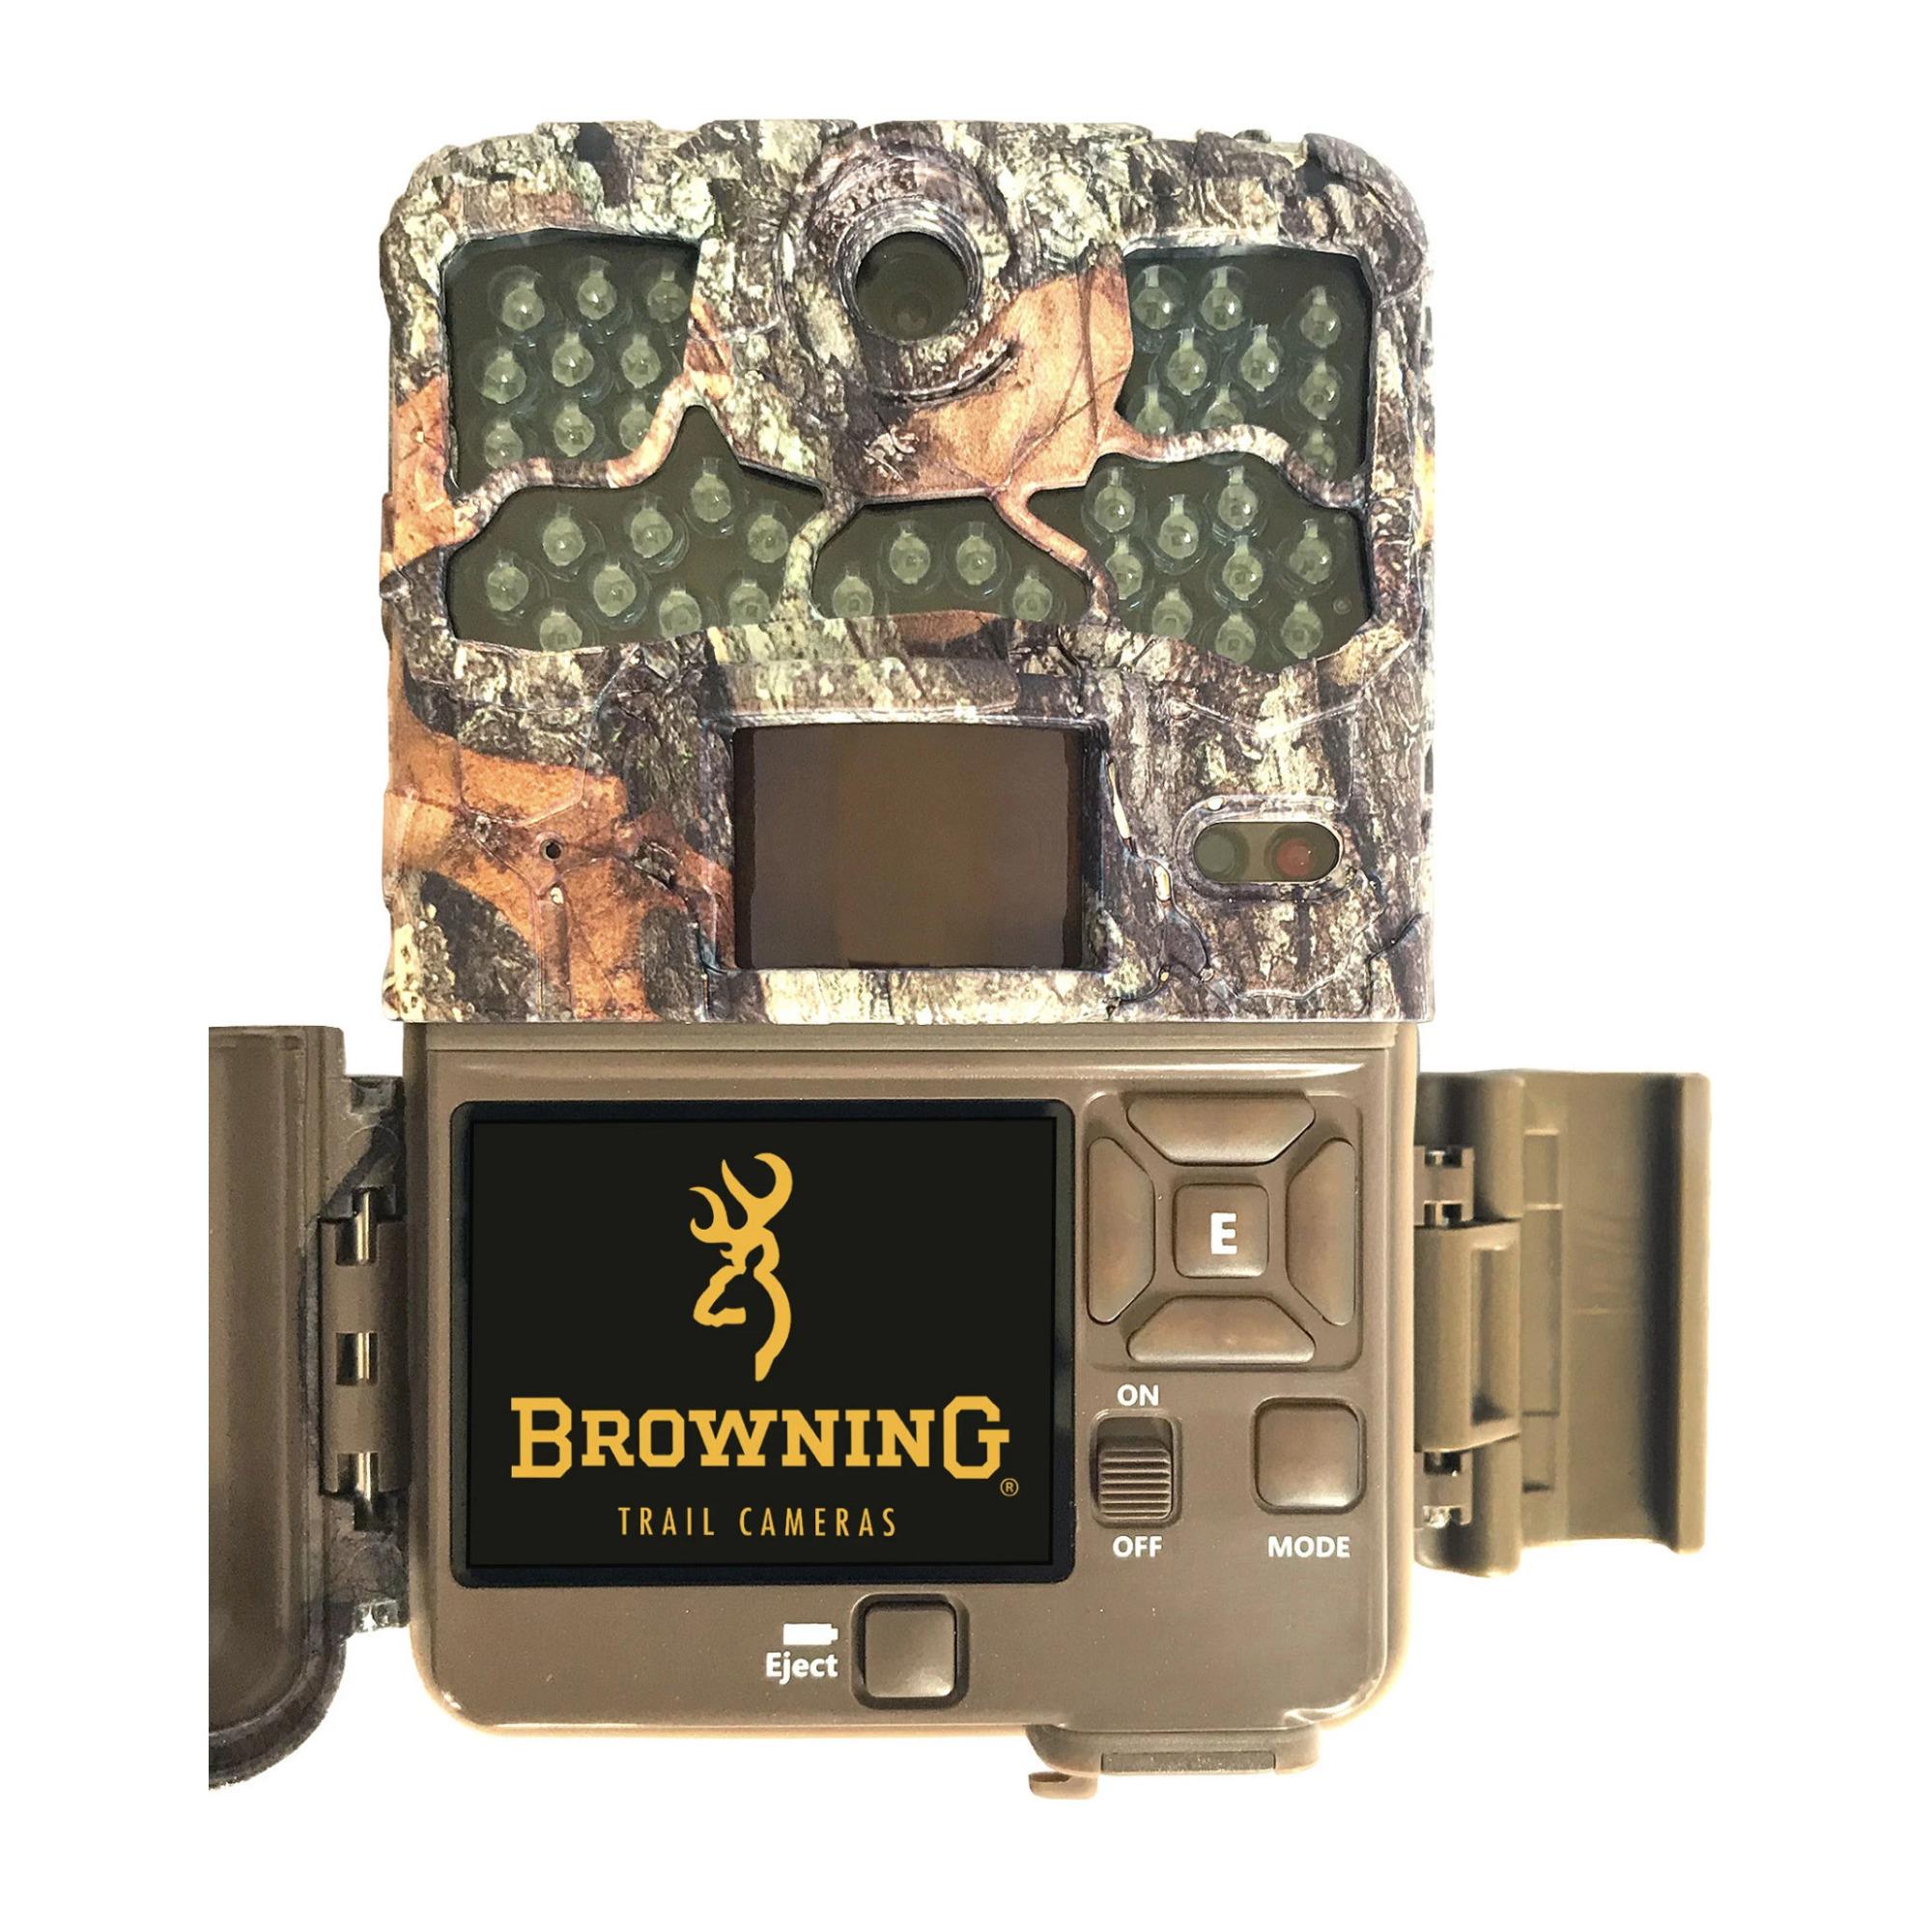 Browning Trail Cameras Recon Force Edge Trail Camera (5-Pk) w/ Security Bundle - image 2 of 8